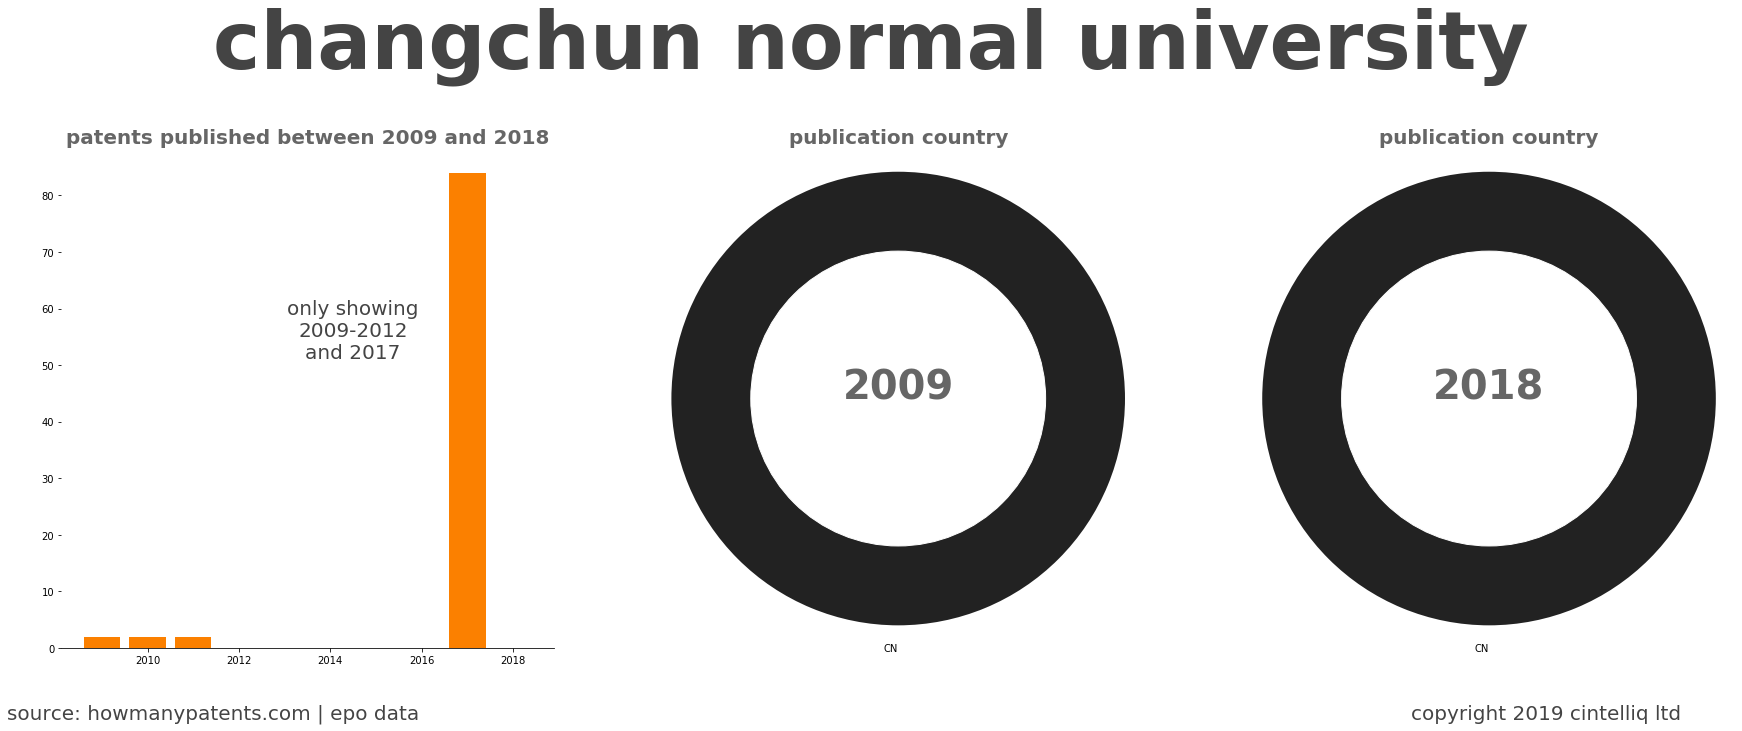 summary of patents for Changchun Normal University